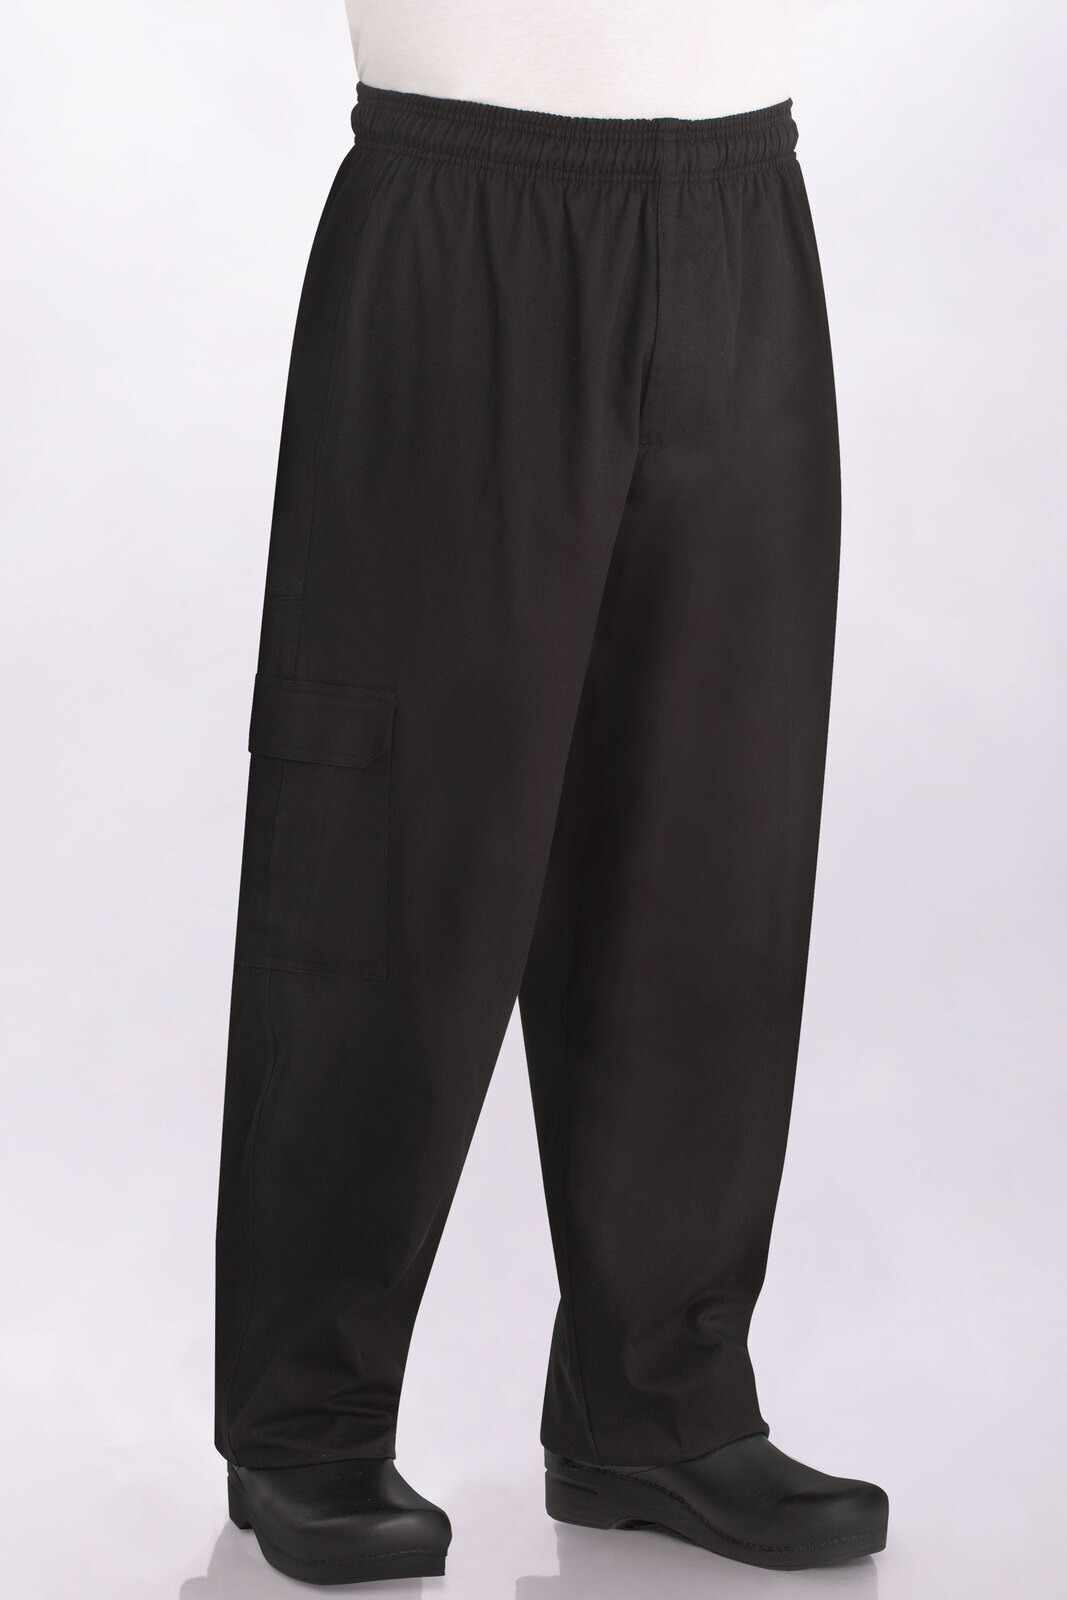 Essential Baggy Chef Pants Chef Works escapeauthority